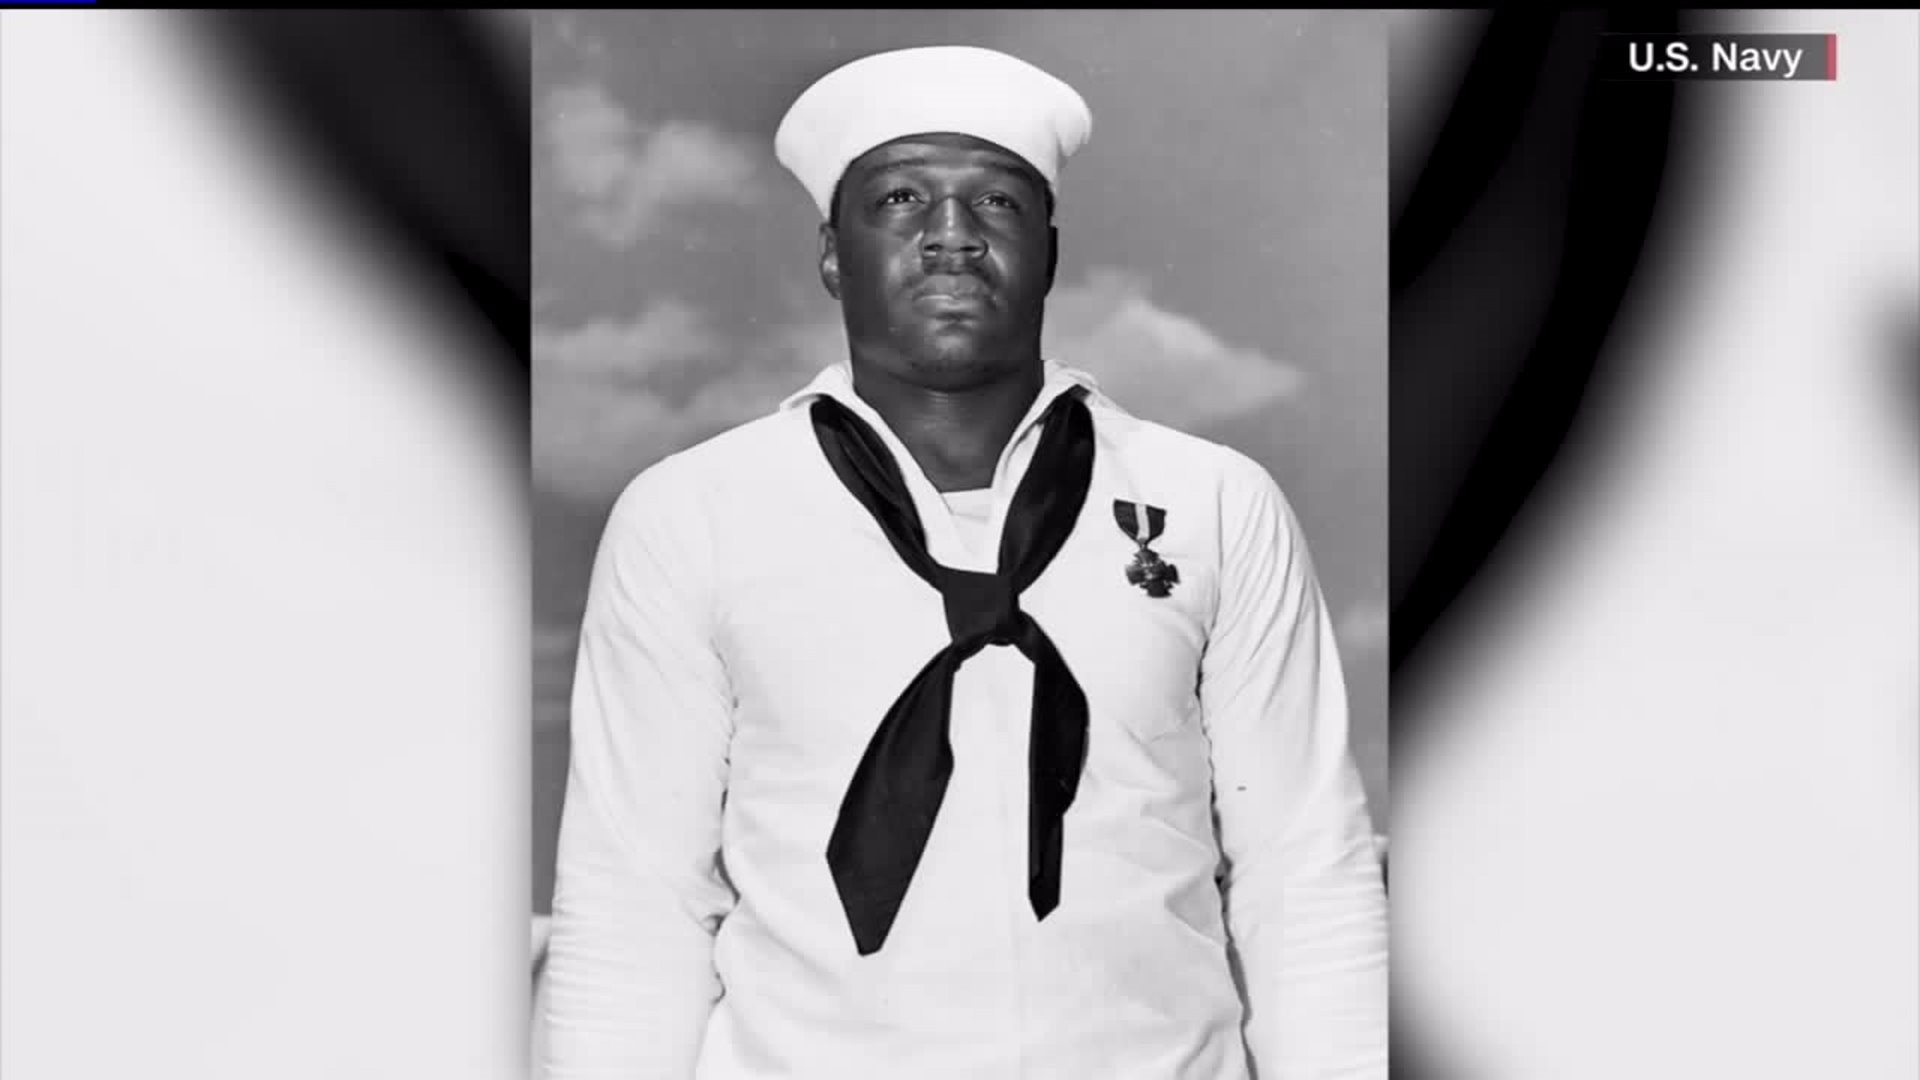 Aircraft carrier named after WWII hero